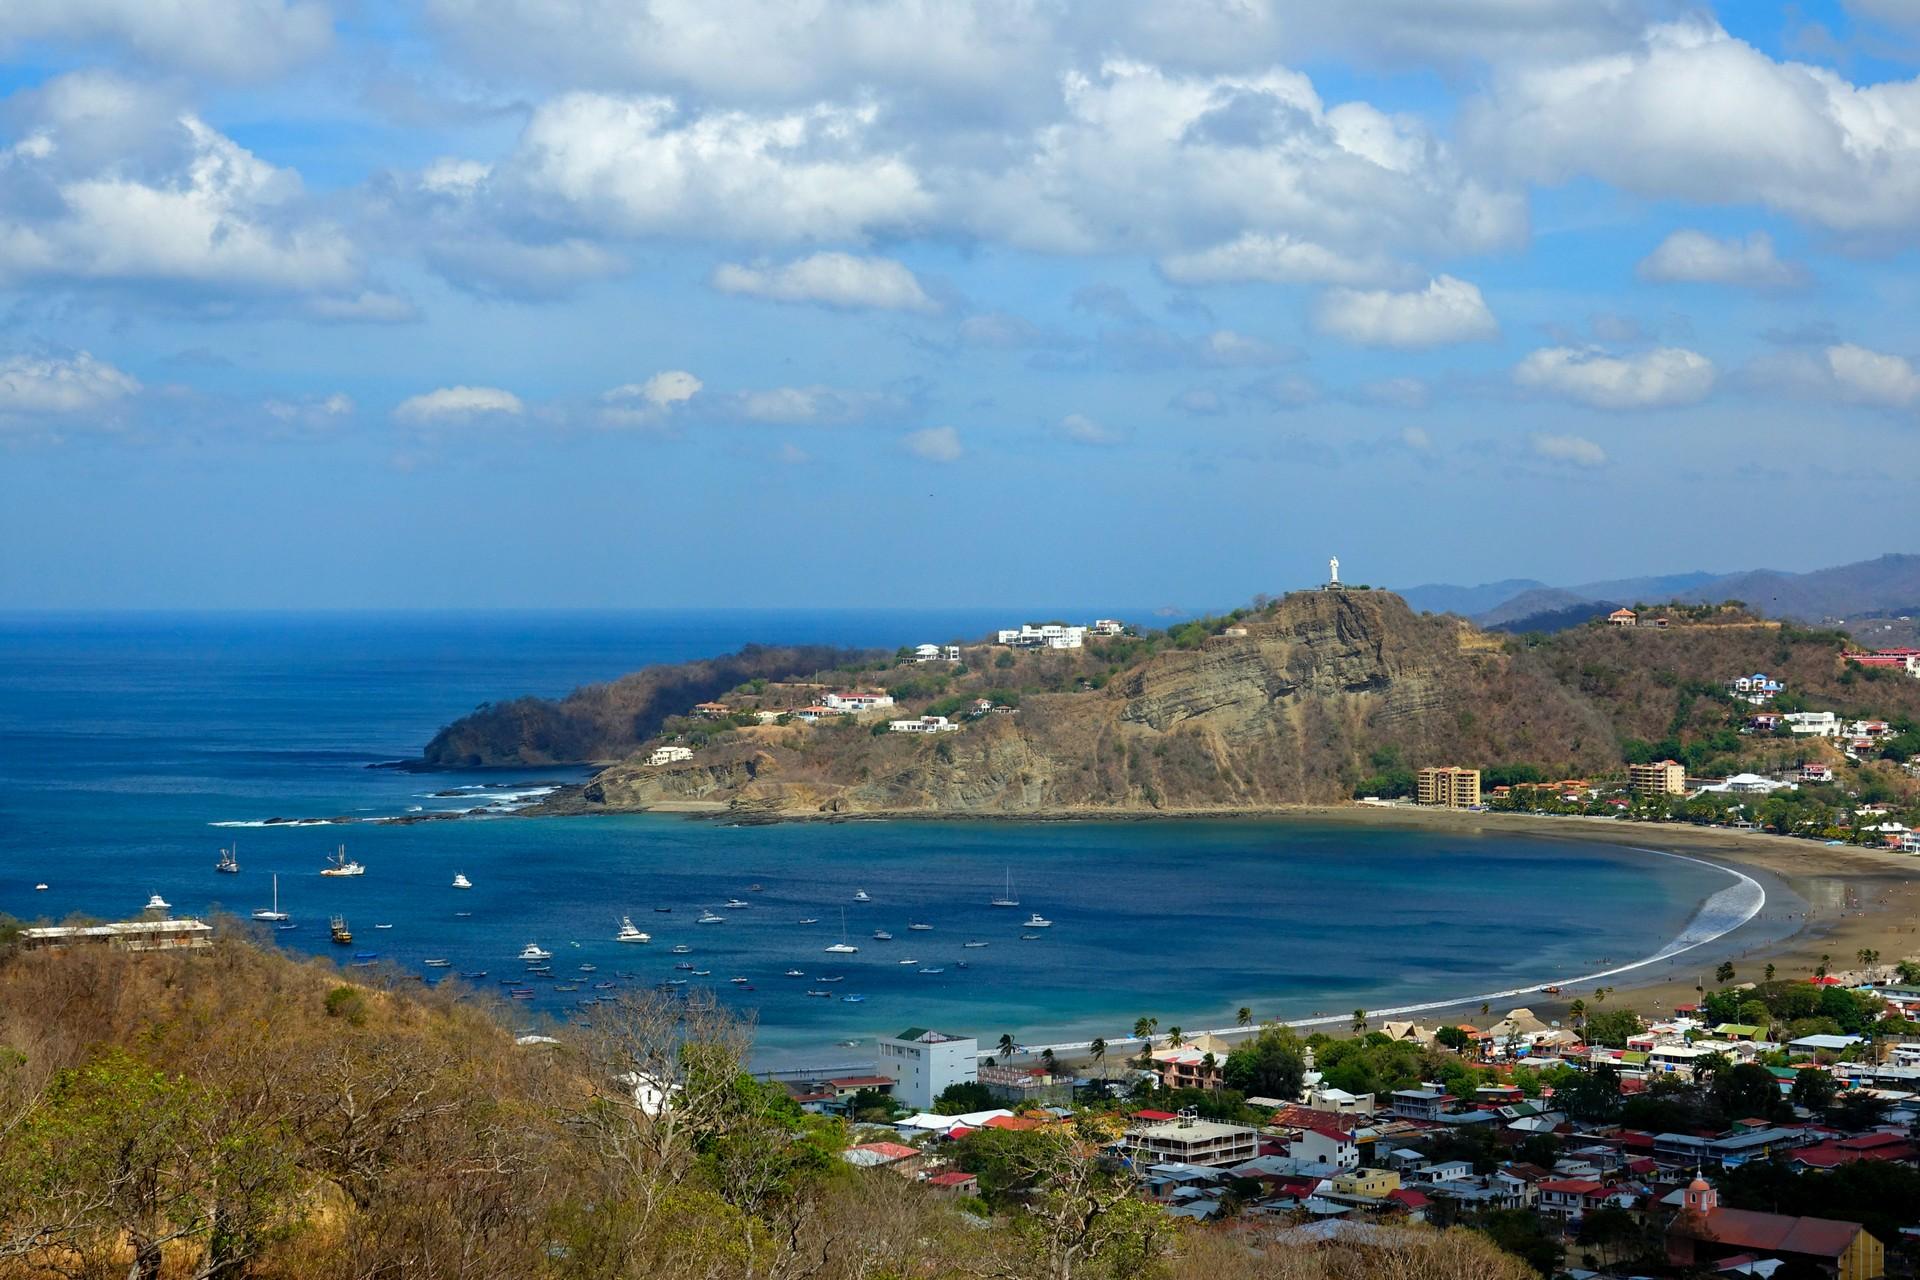 San Juan del Sur in sunny weather with few clouds